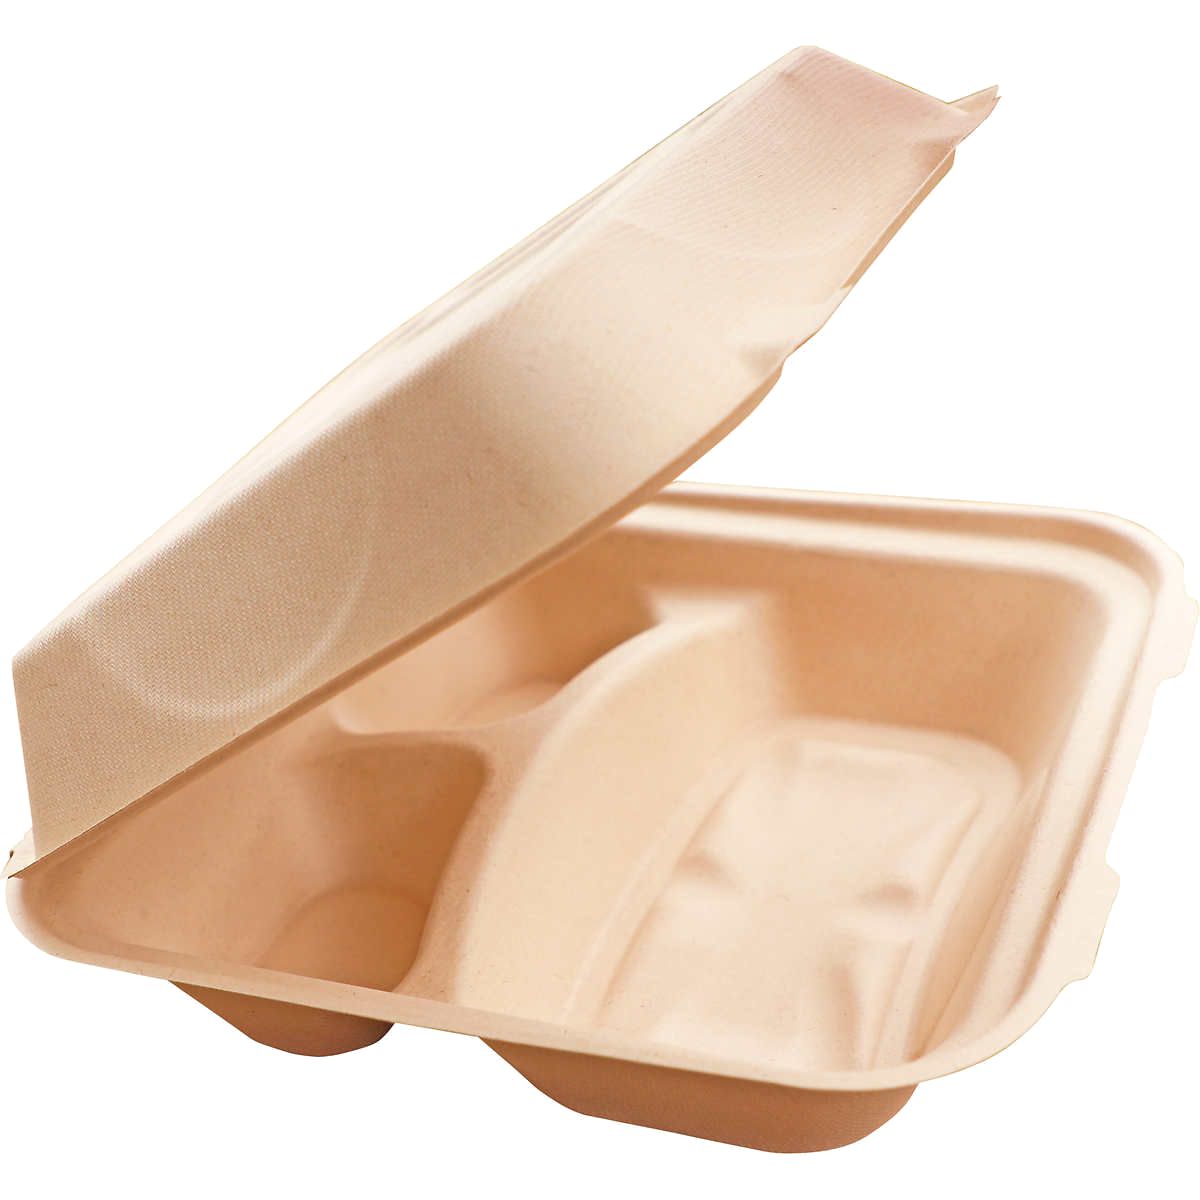 Compostable 9x9x3 3 Compartment Clamshell To Go Containers 200